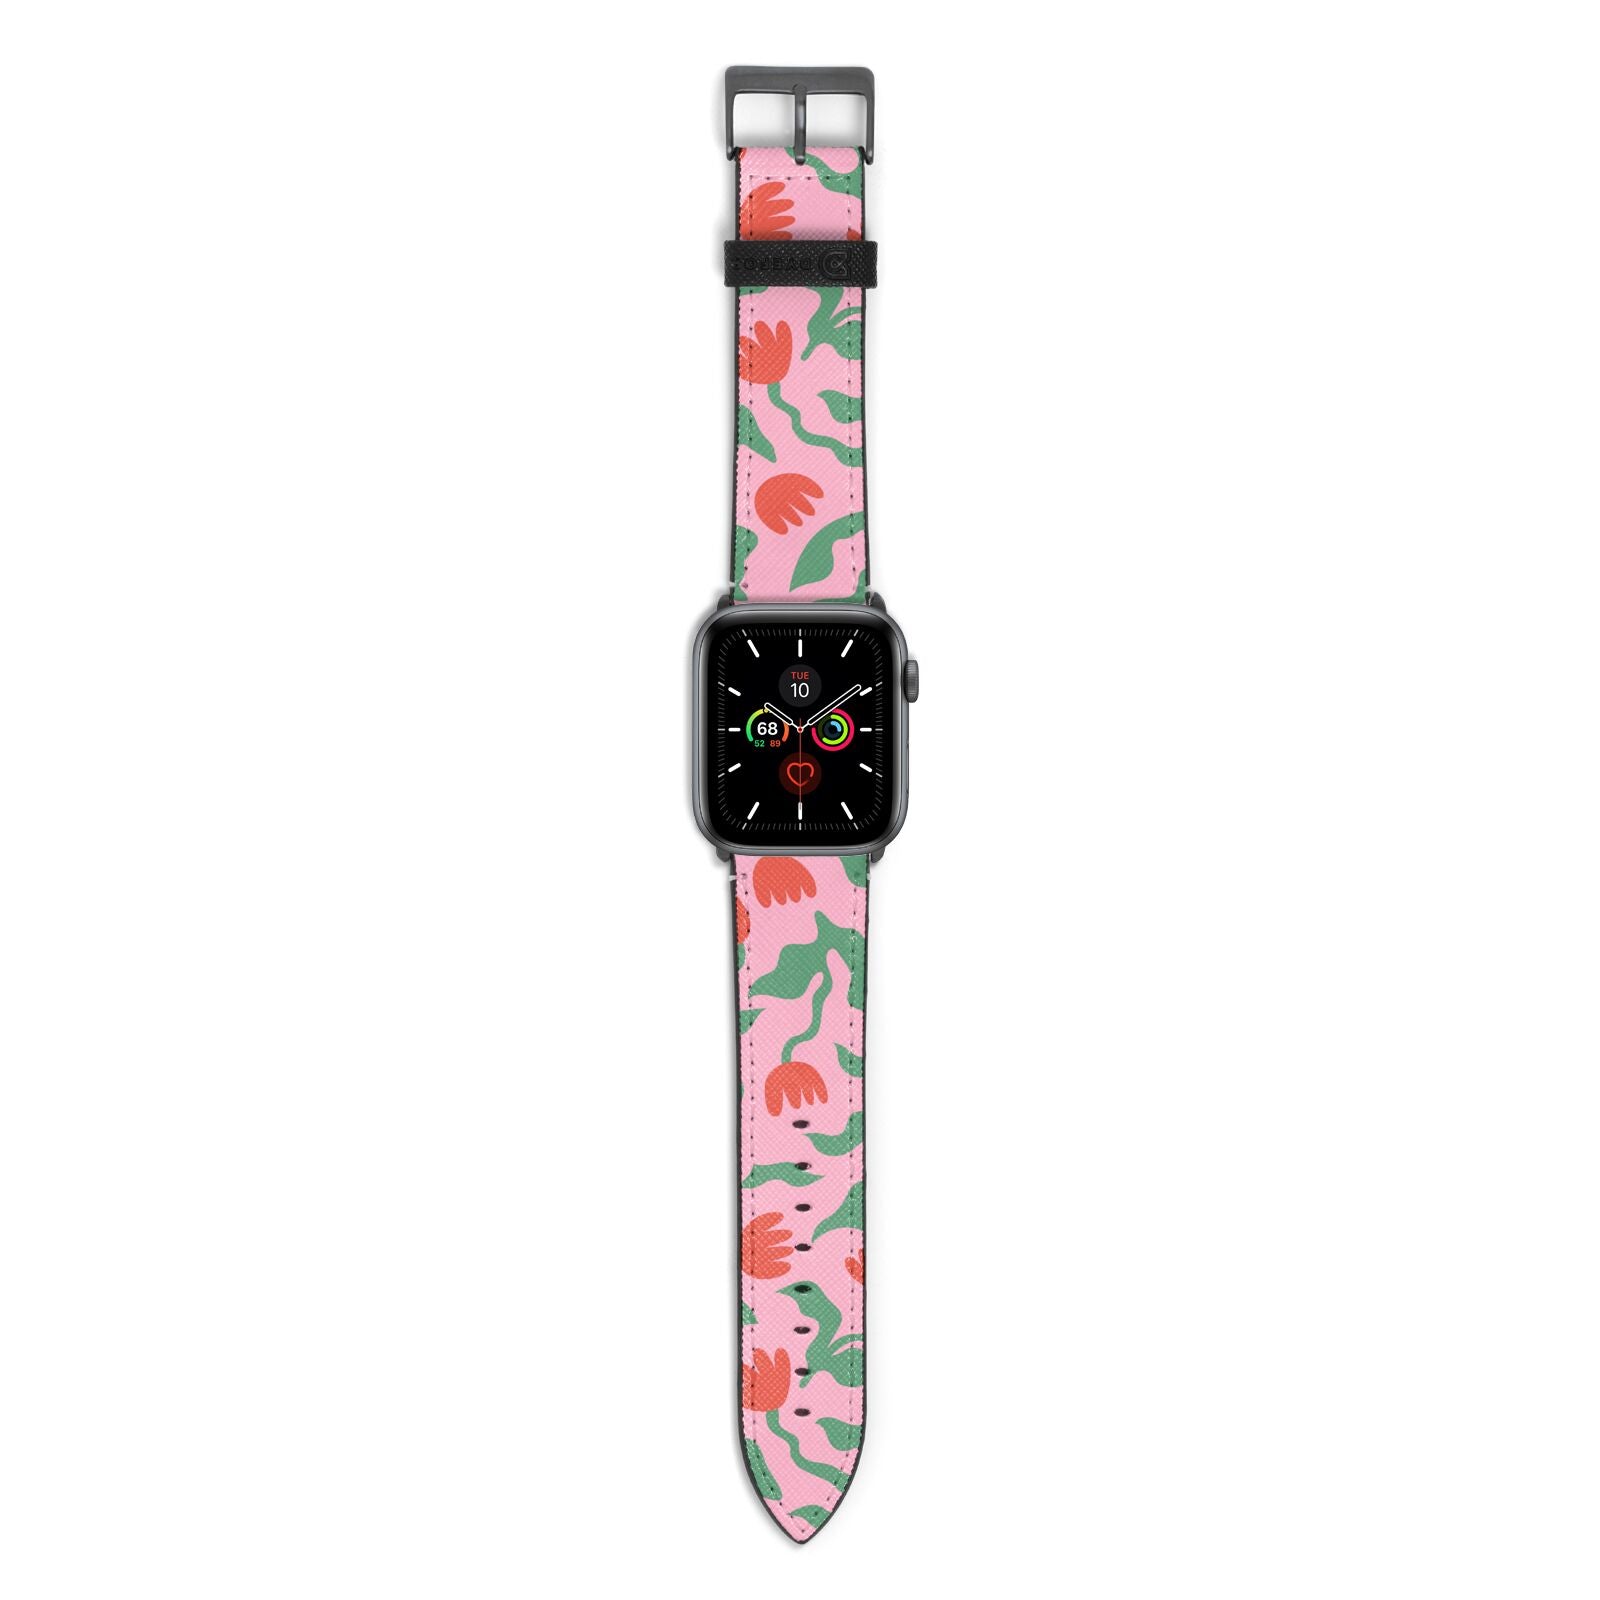 Simple Floral Apple Watch Strap with Space Grey Hardware